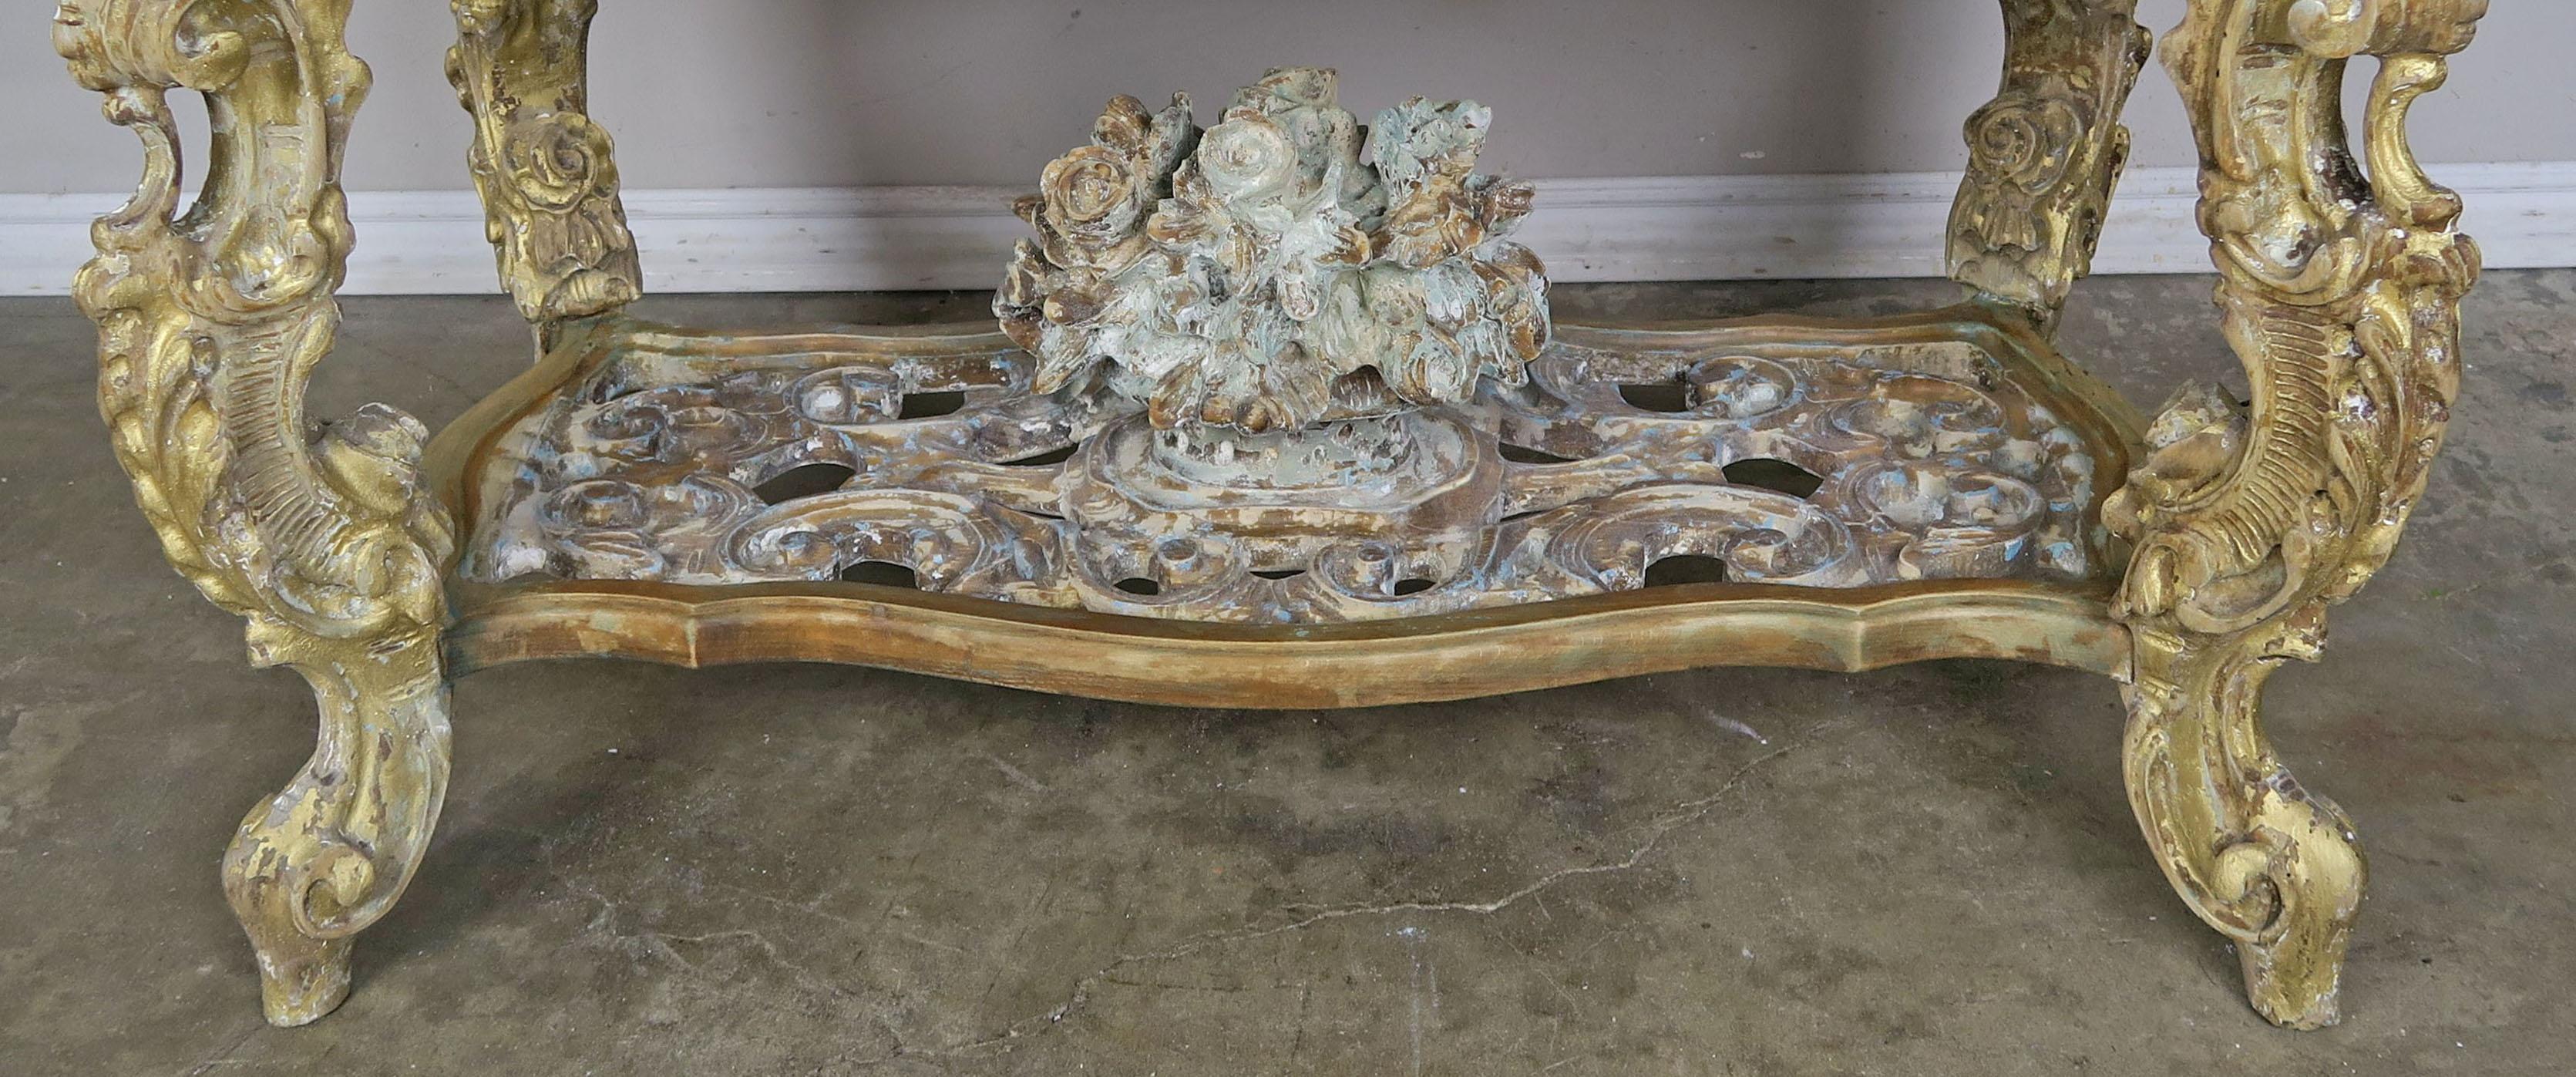 Mid-20th Century Carved French Rococo Style Tea Table with Silvered Mirror Top, circa 1930s